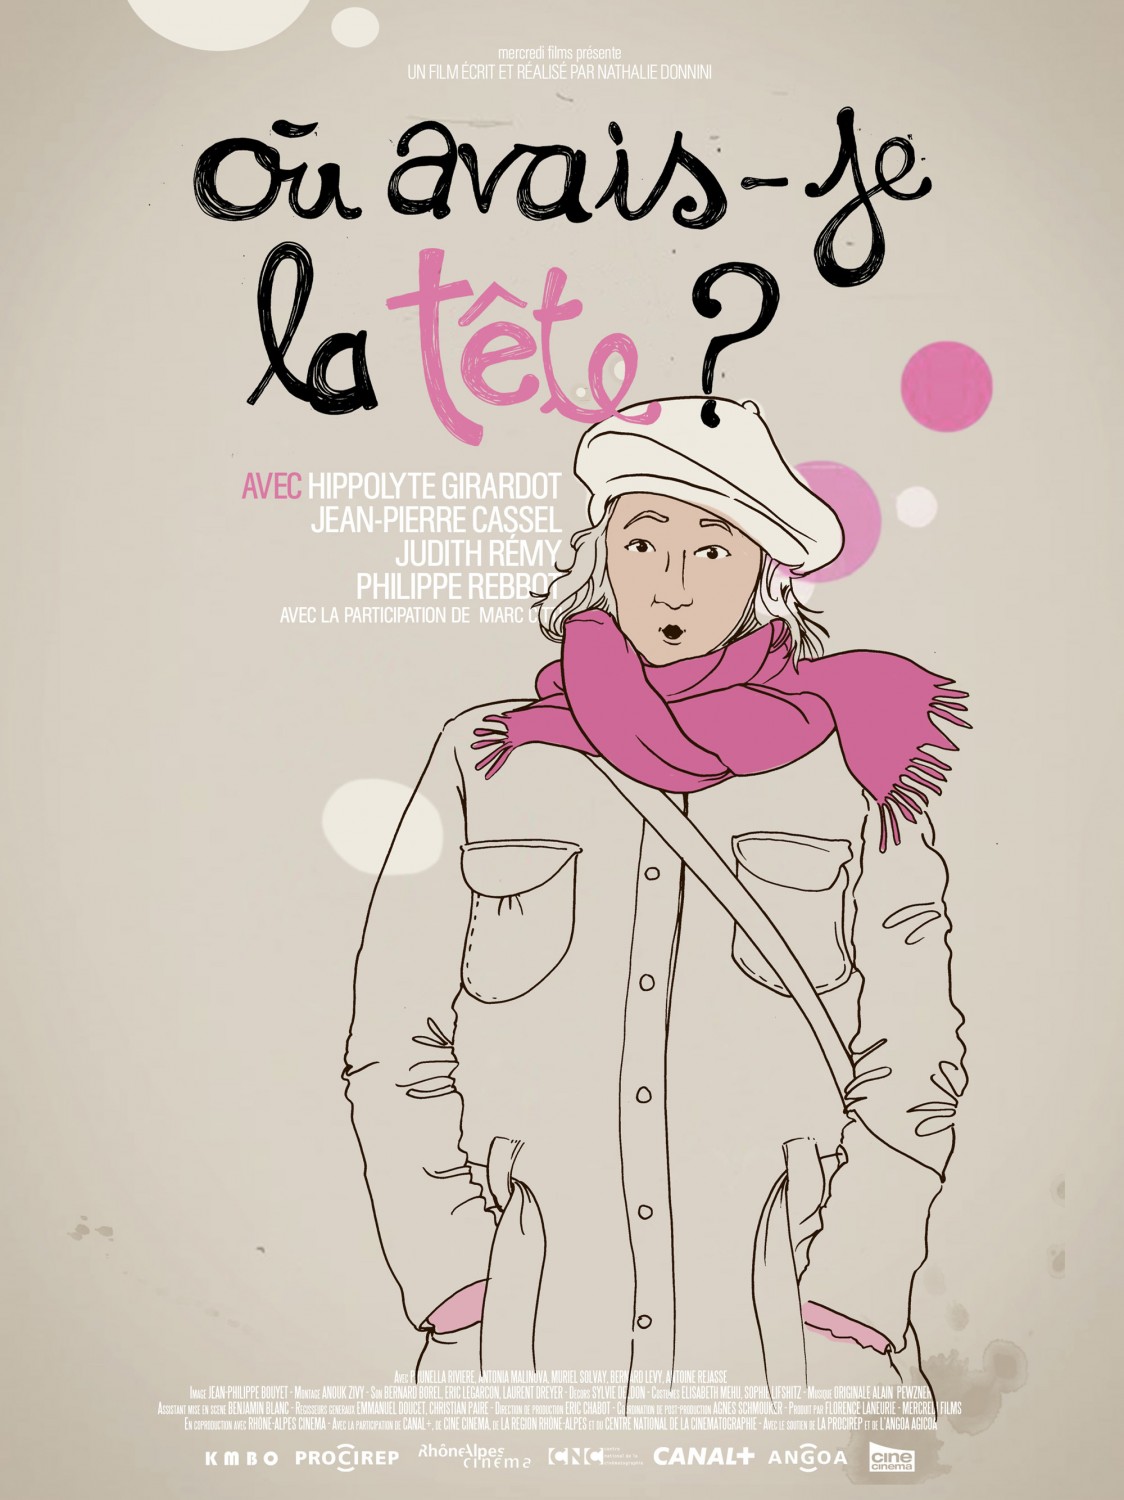 Extra Large Movie Poster Image for Où avais-je la tête? (#2 of 3)